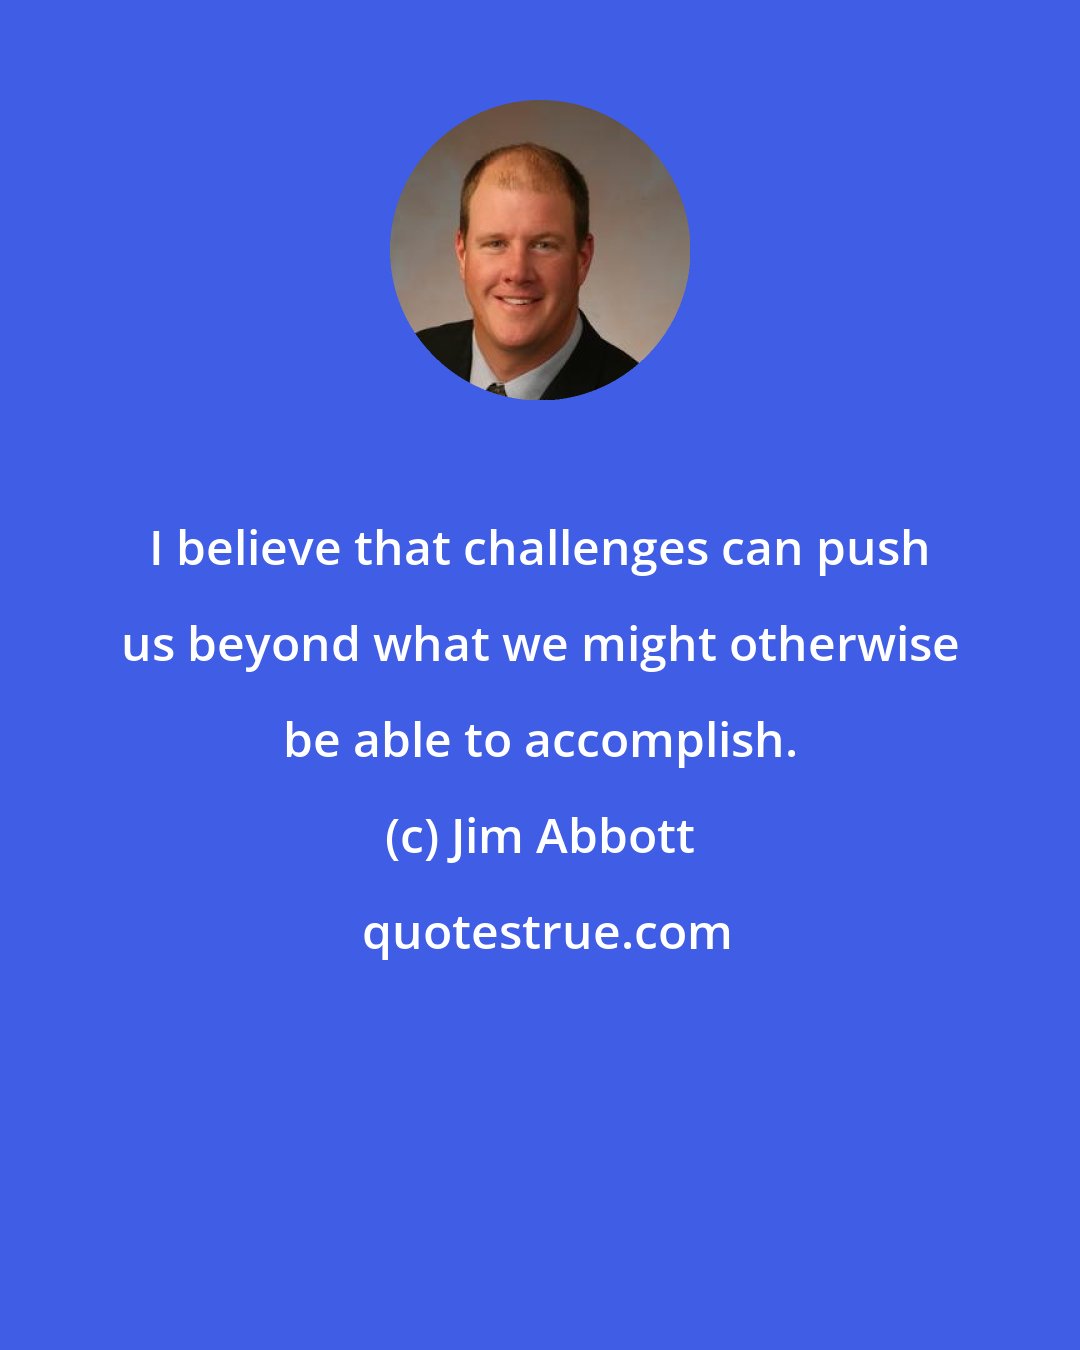 Jim Abbott: I believe that challenges can push us beyond what we might otherwise be able to accomplish.